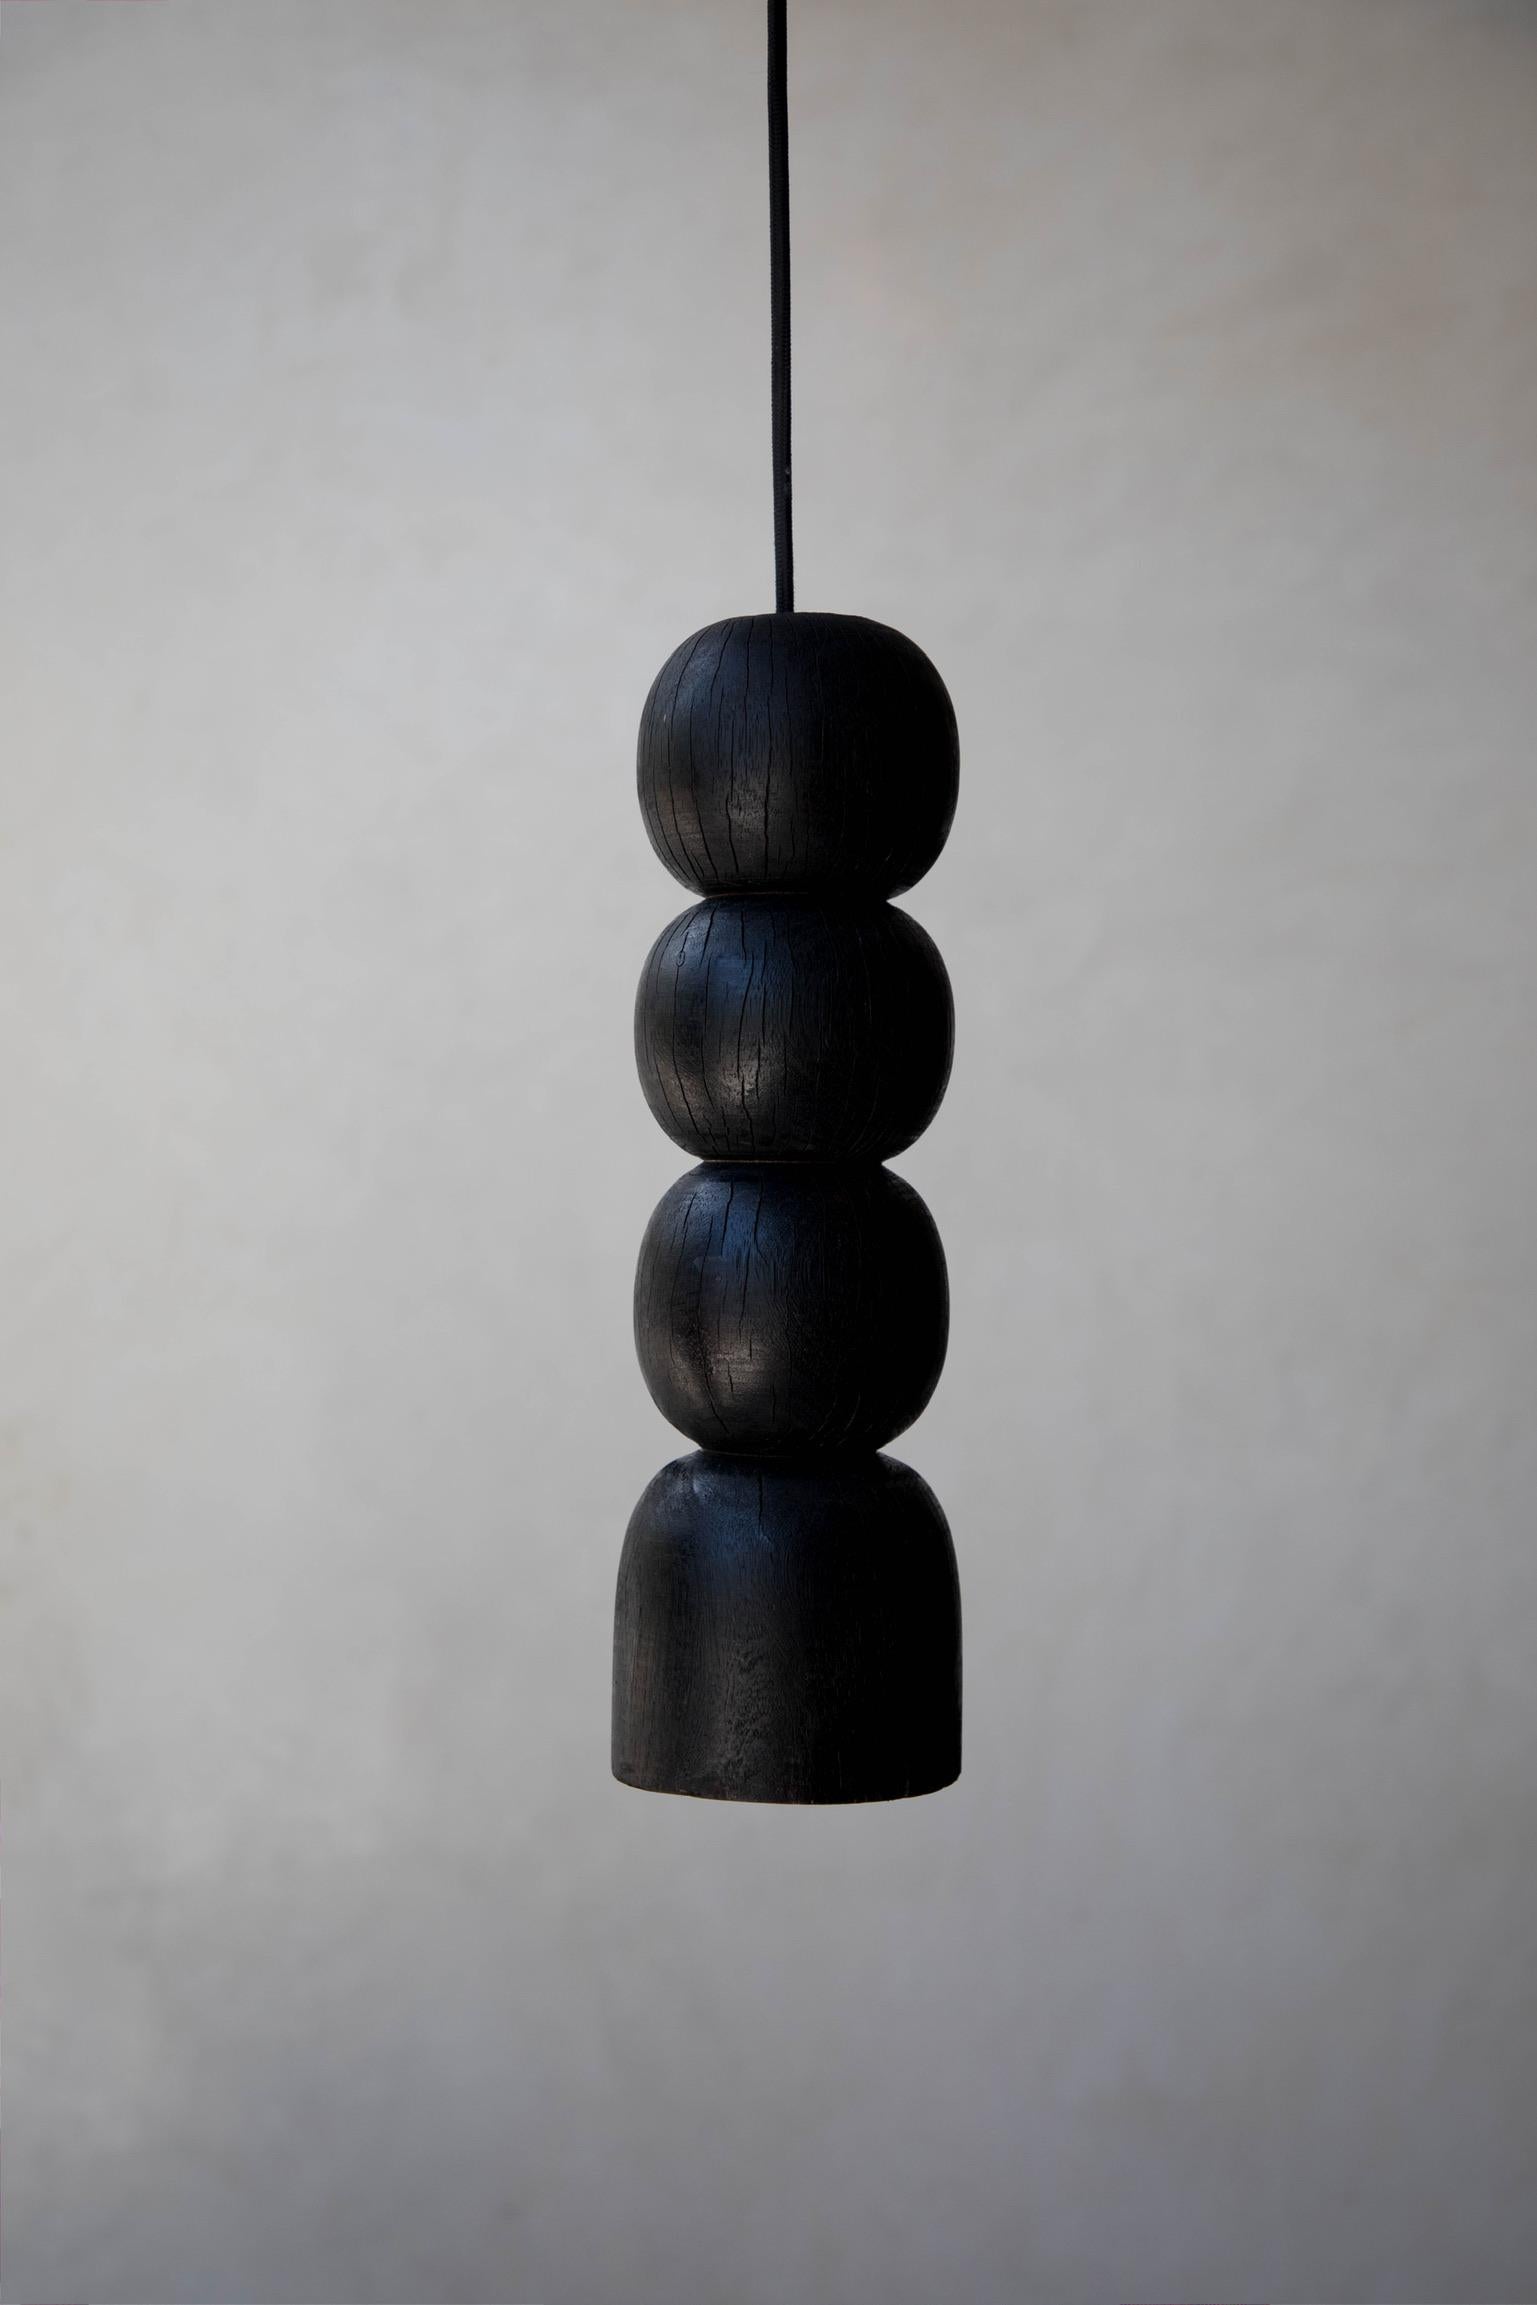 Black Original L5 wood pendant lamp by Daniel Orozco
Material: Jabin wood.
Dimensions: D 12 x H 42 cm
Available in natural or black wood finish.

Sphere hanging lamp of jabin wood, natural or black finish. Handmade by Mexican